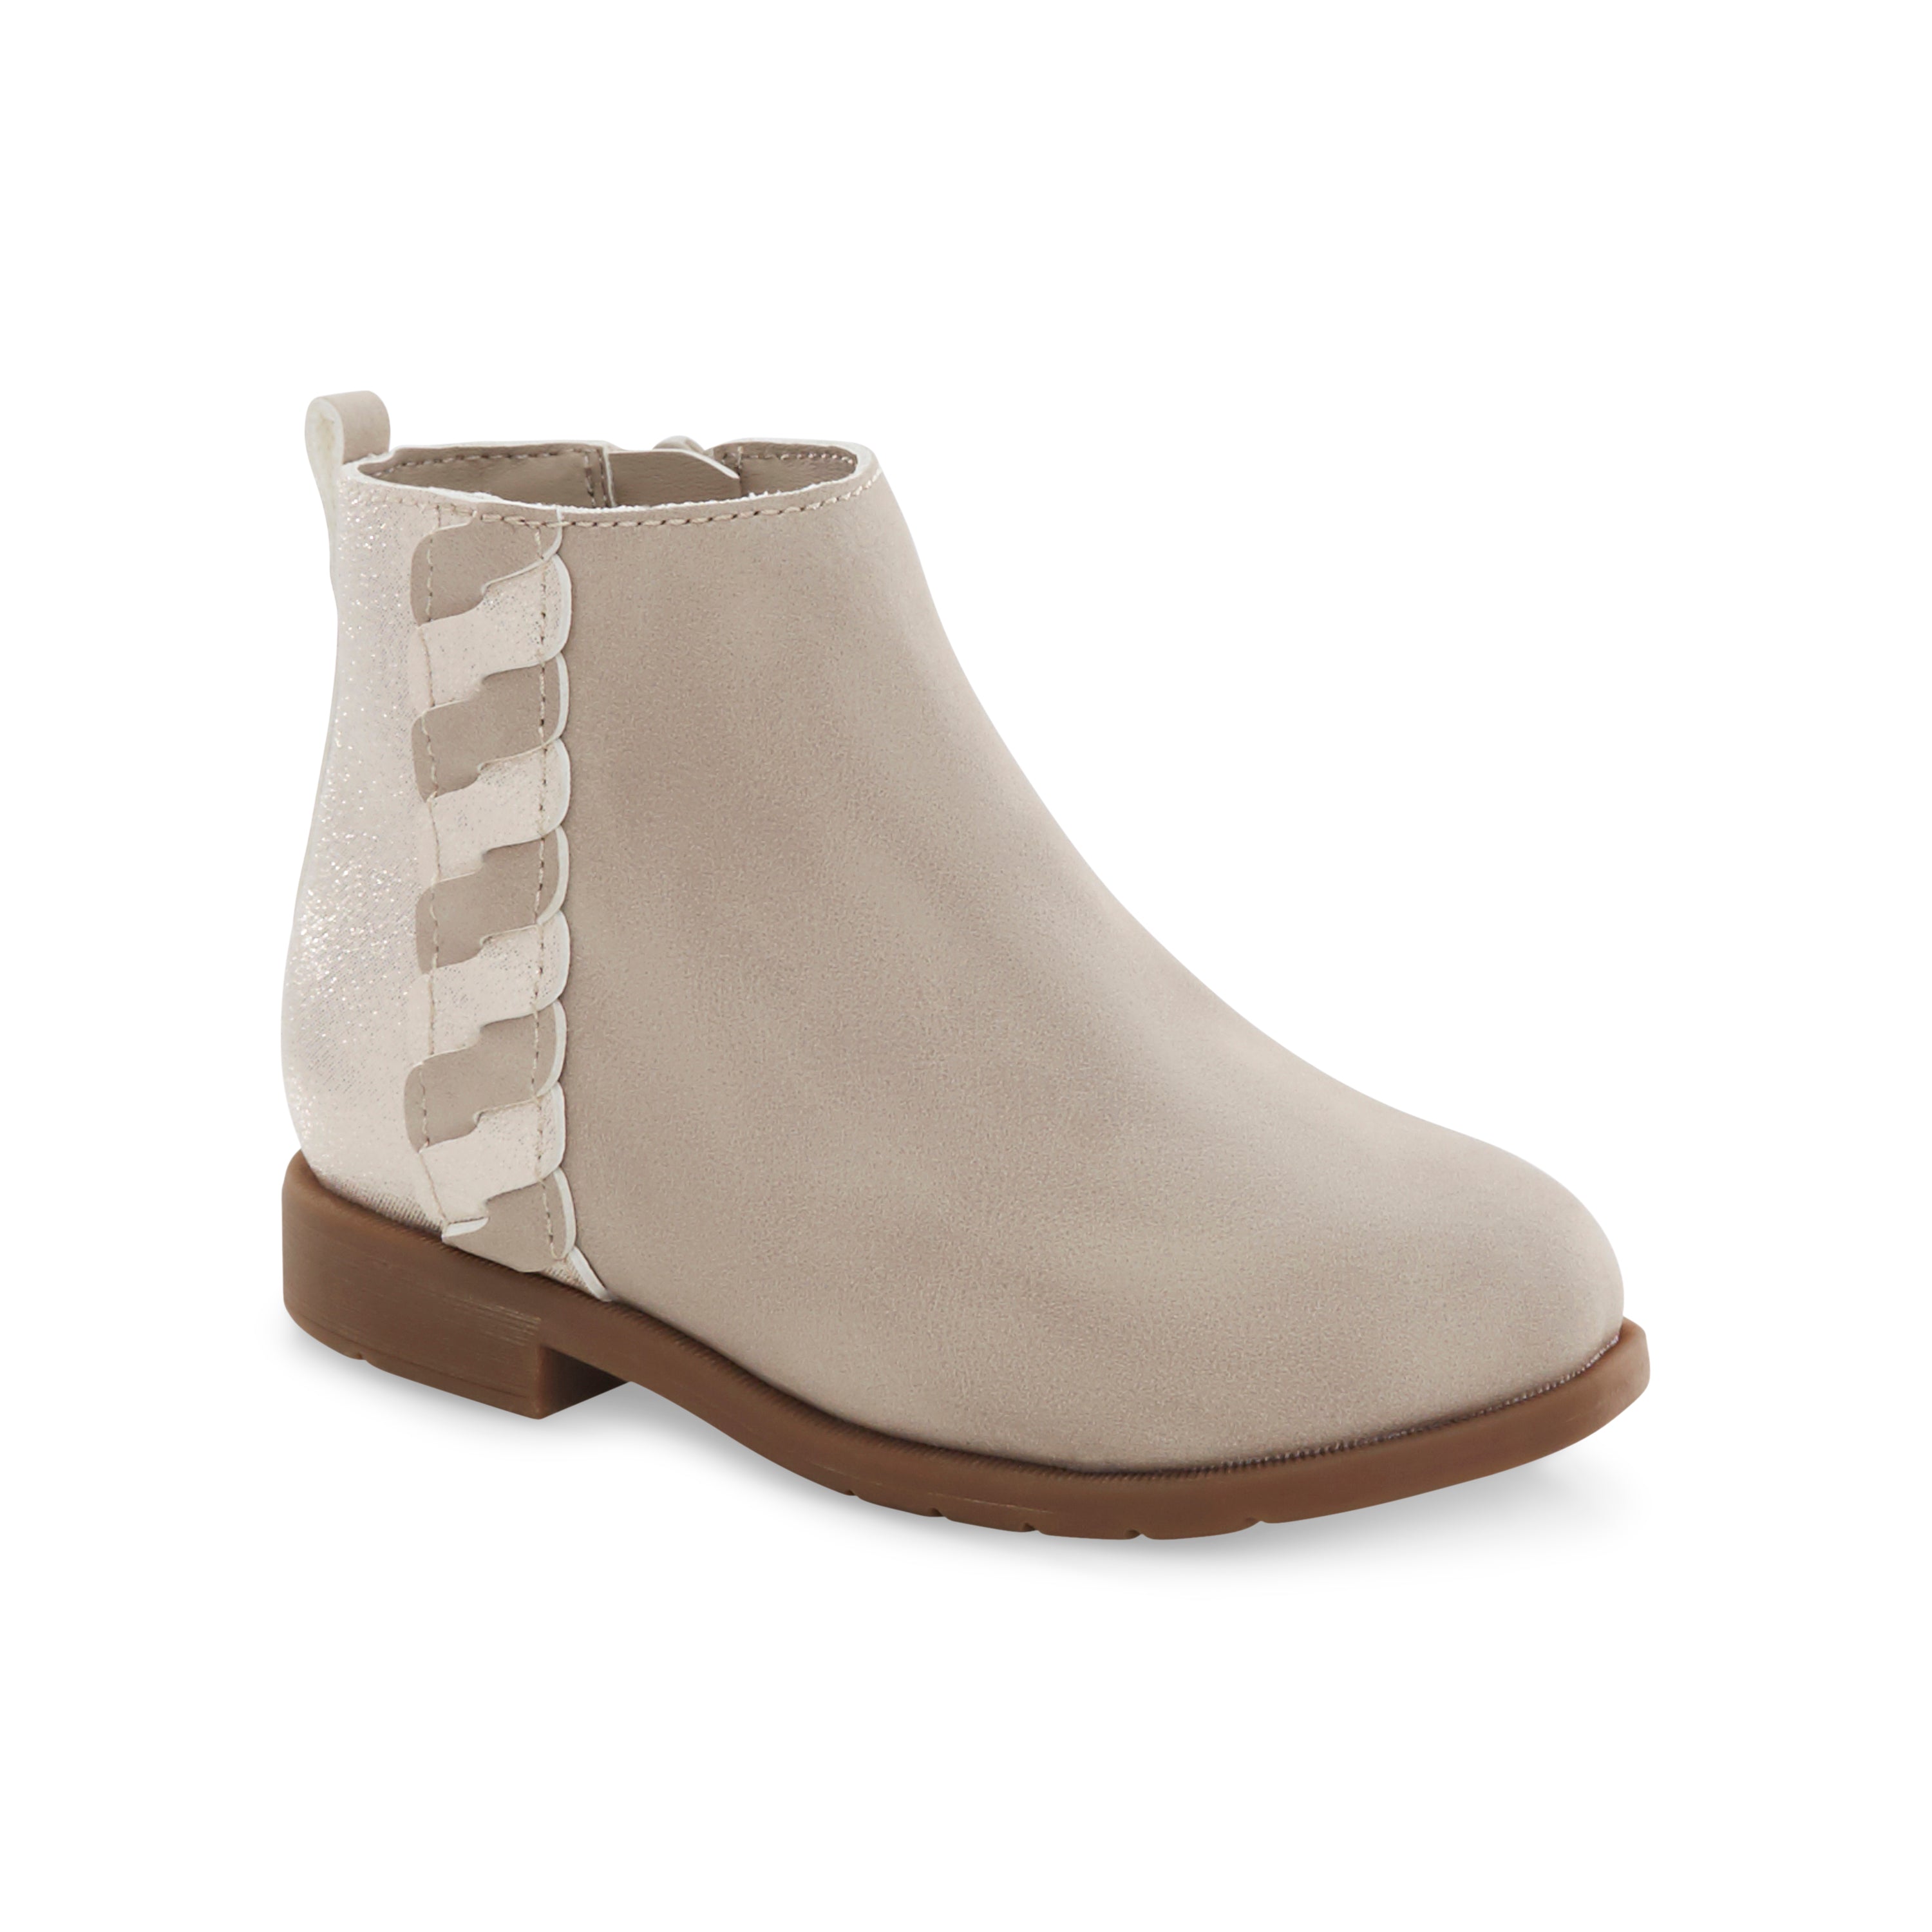 SR Carolyn Kid's Ankle Boot - Taupe